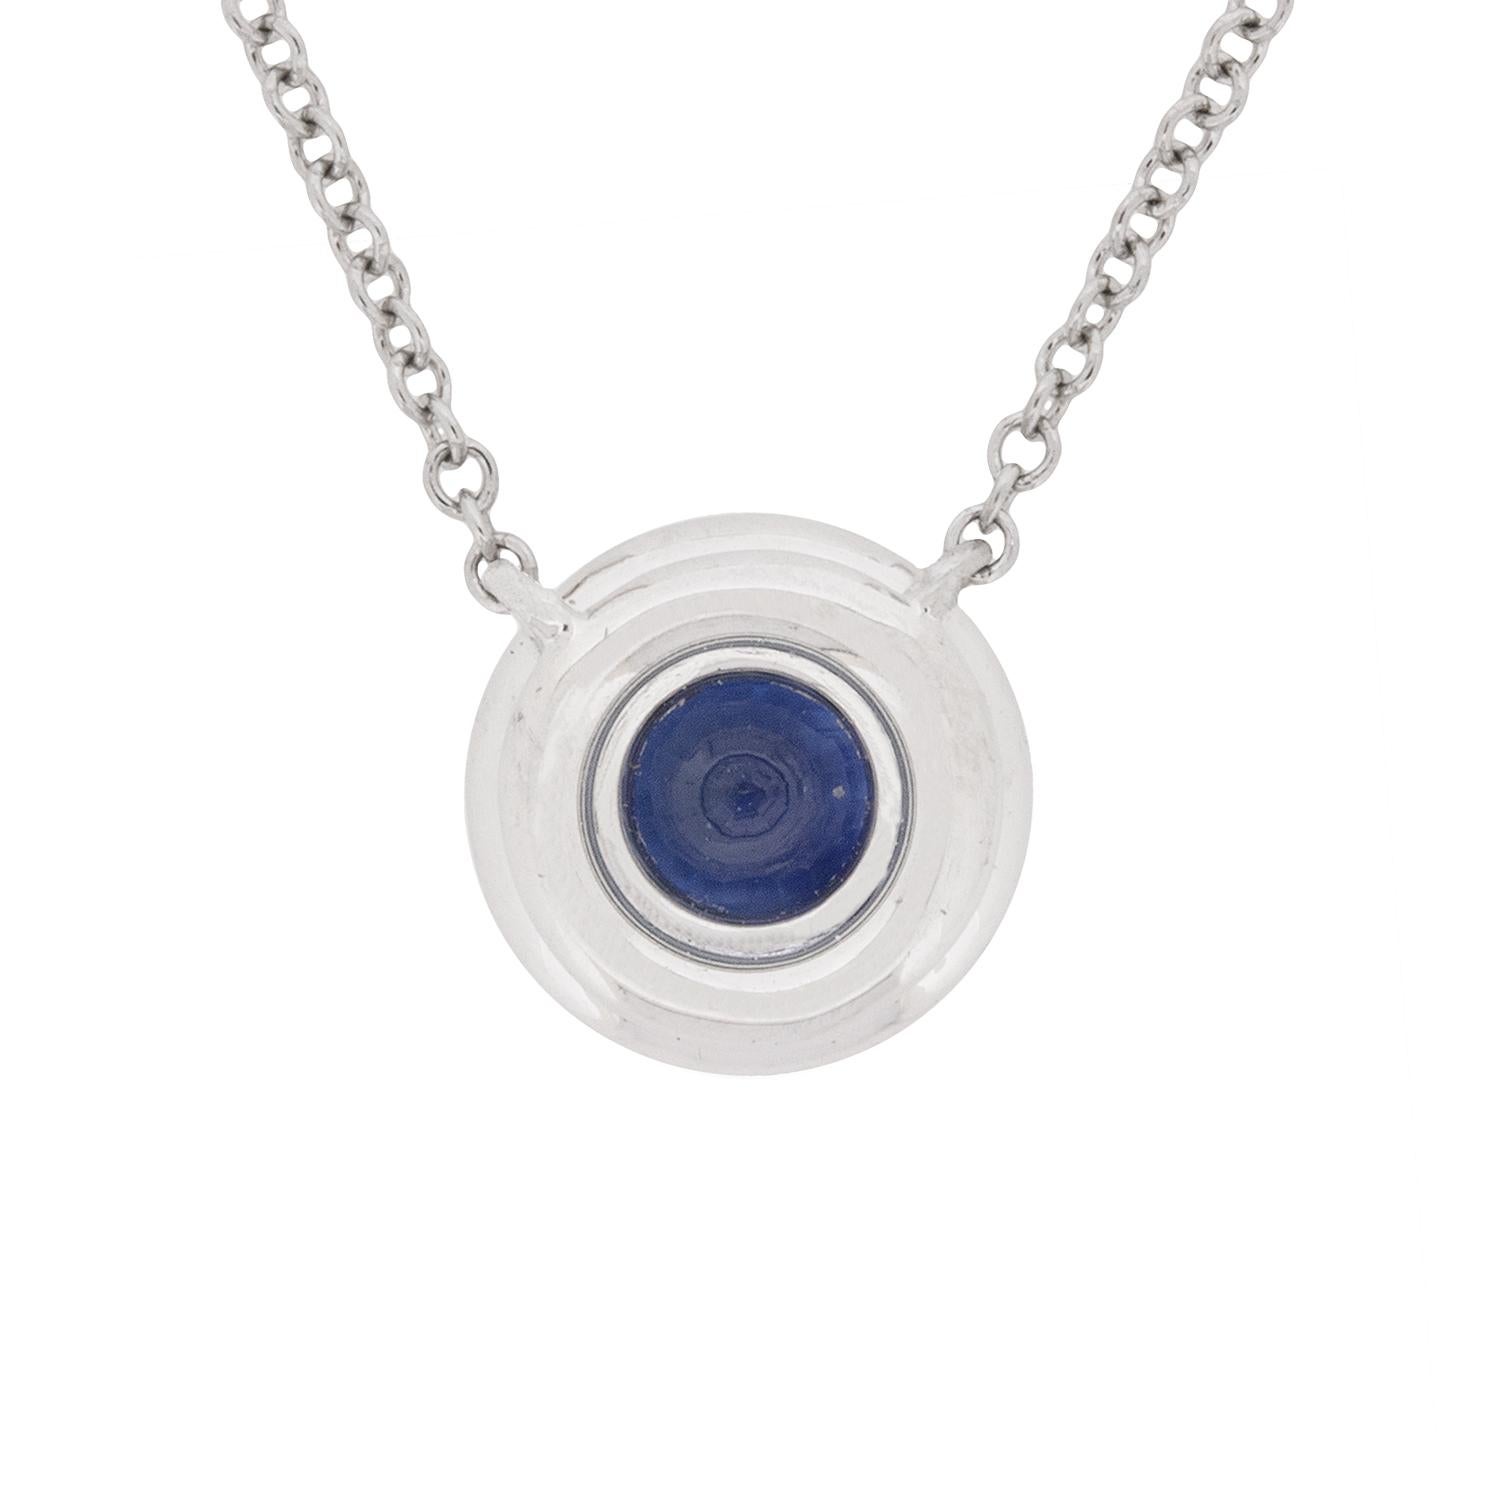 An elegant pendant from the Tiffany & Co Soleste collection. It features a wonderfully deep blue sapphire in the centre weighing 0.40 carat. The sapphire is then surrounded by a halo of high quality diamonds, weighing 0.09 carat in total. They are G